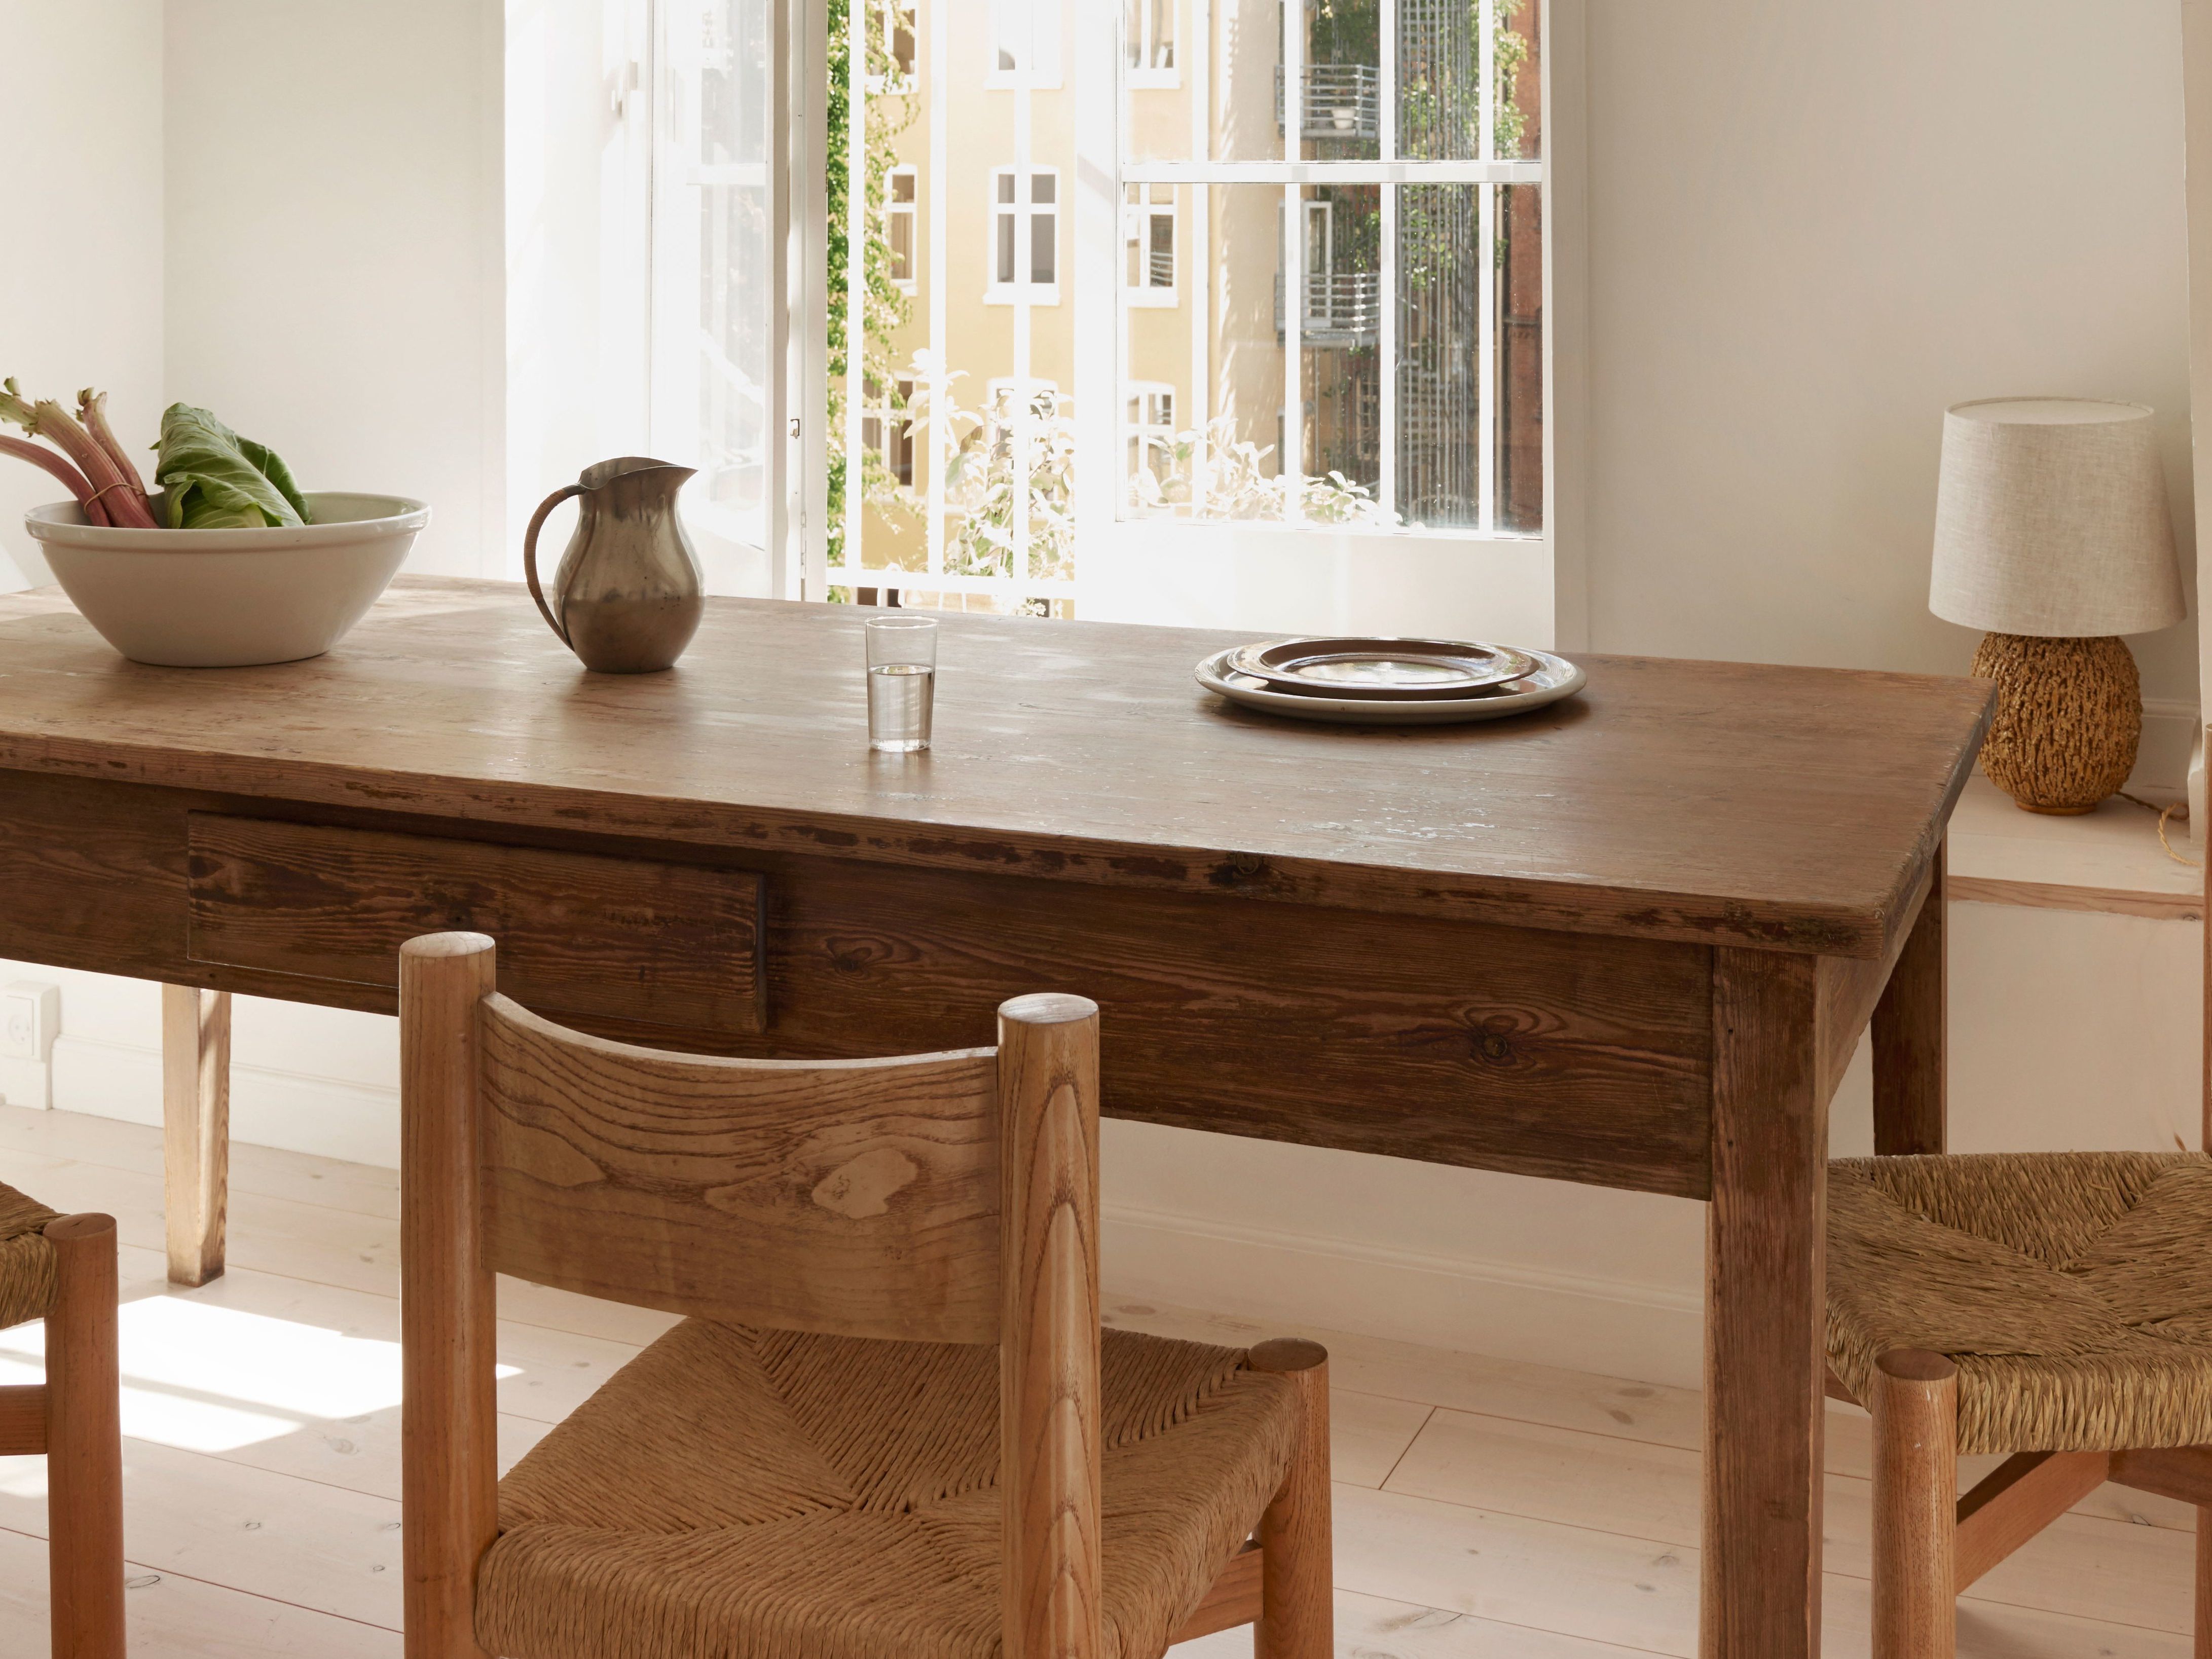 Well Liked Falmer 3 Piece Solid Wood Dining Sets With A Farm Table Sent Us Into Debt (View 16 of 20)